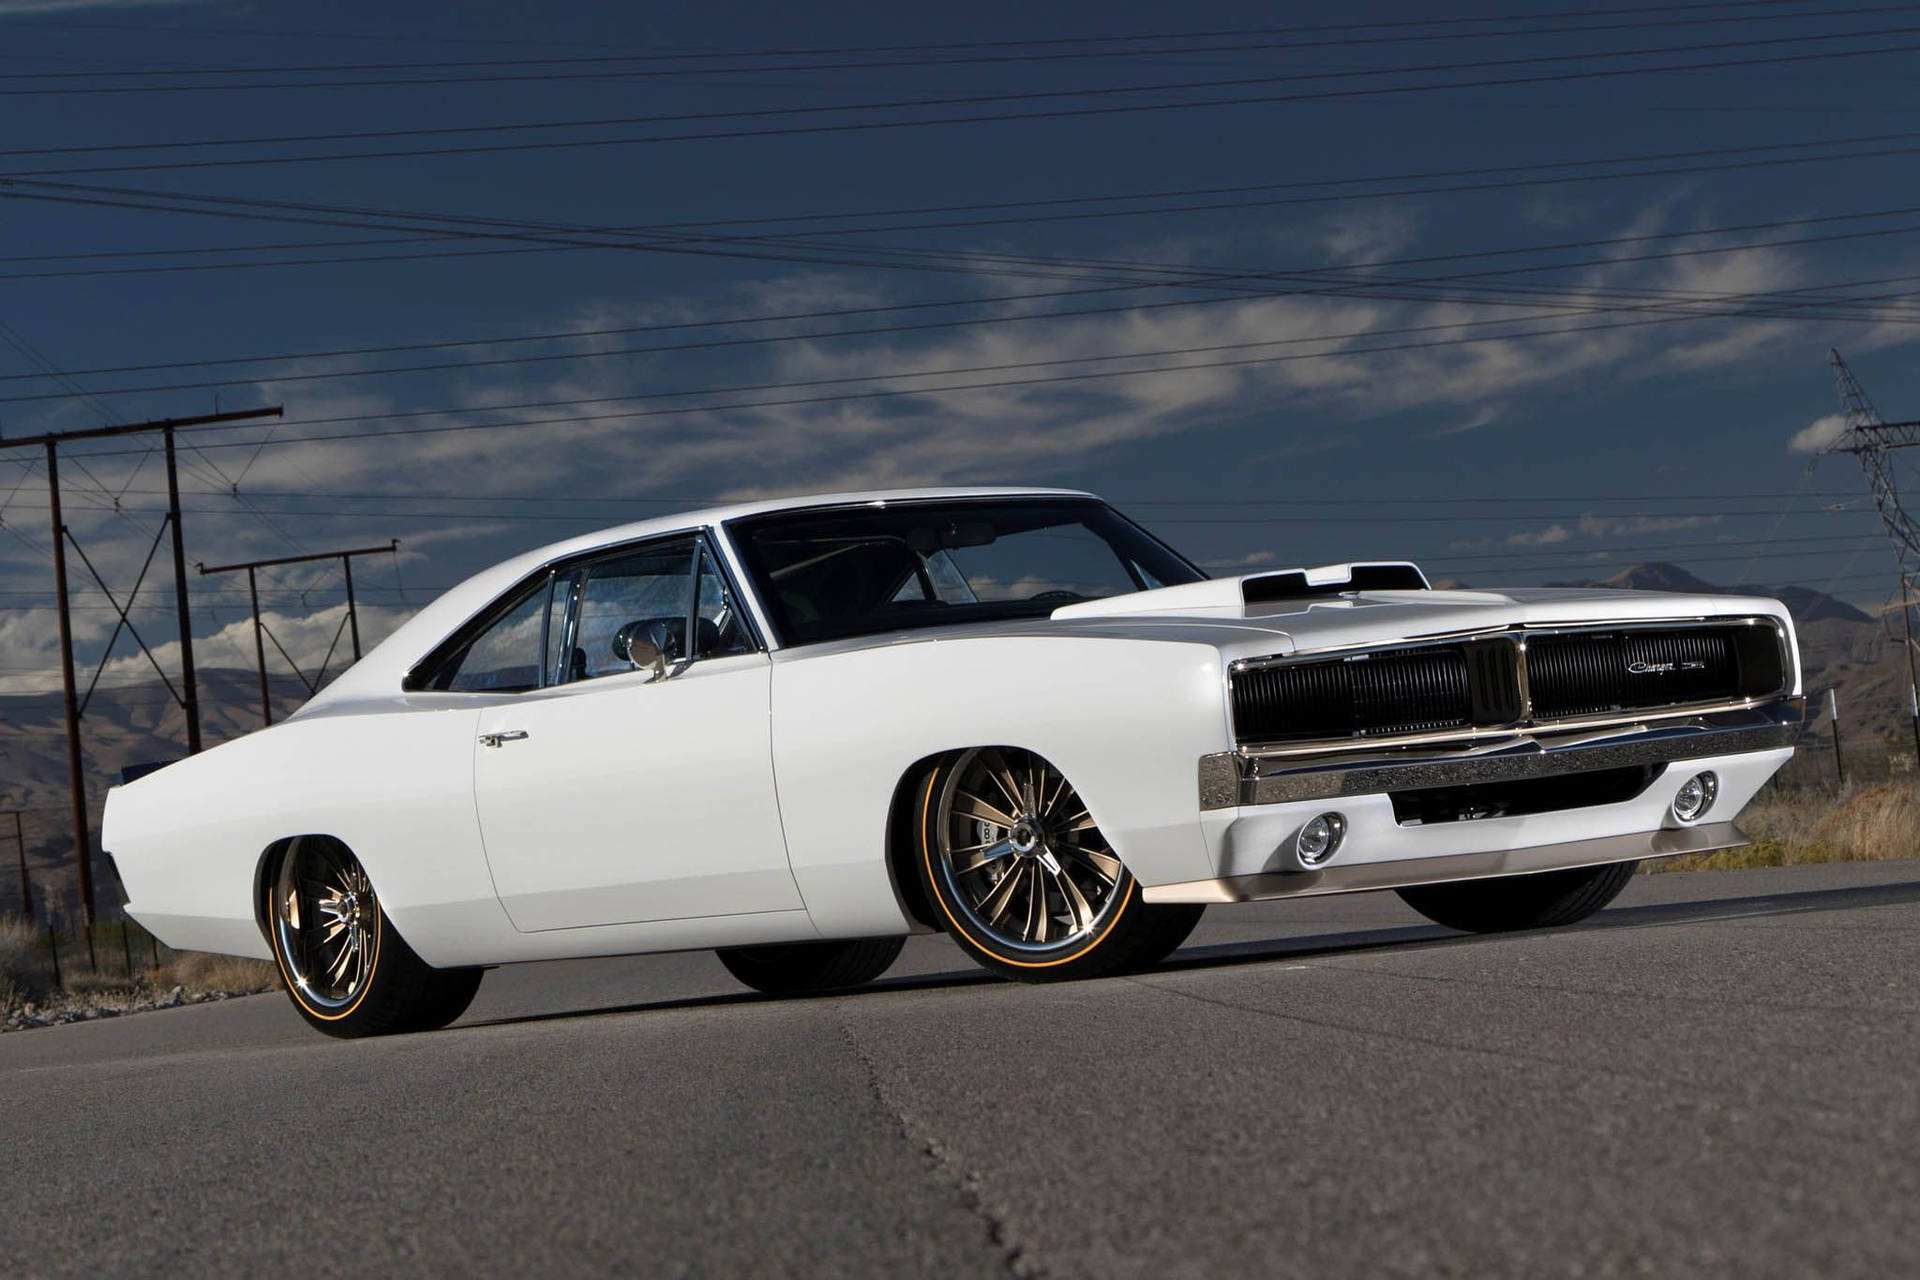 Classic Charm - 1969 Dodge Charger in Matte White Finish Wallpaper